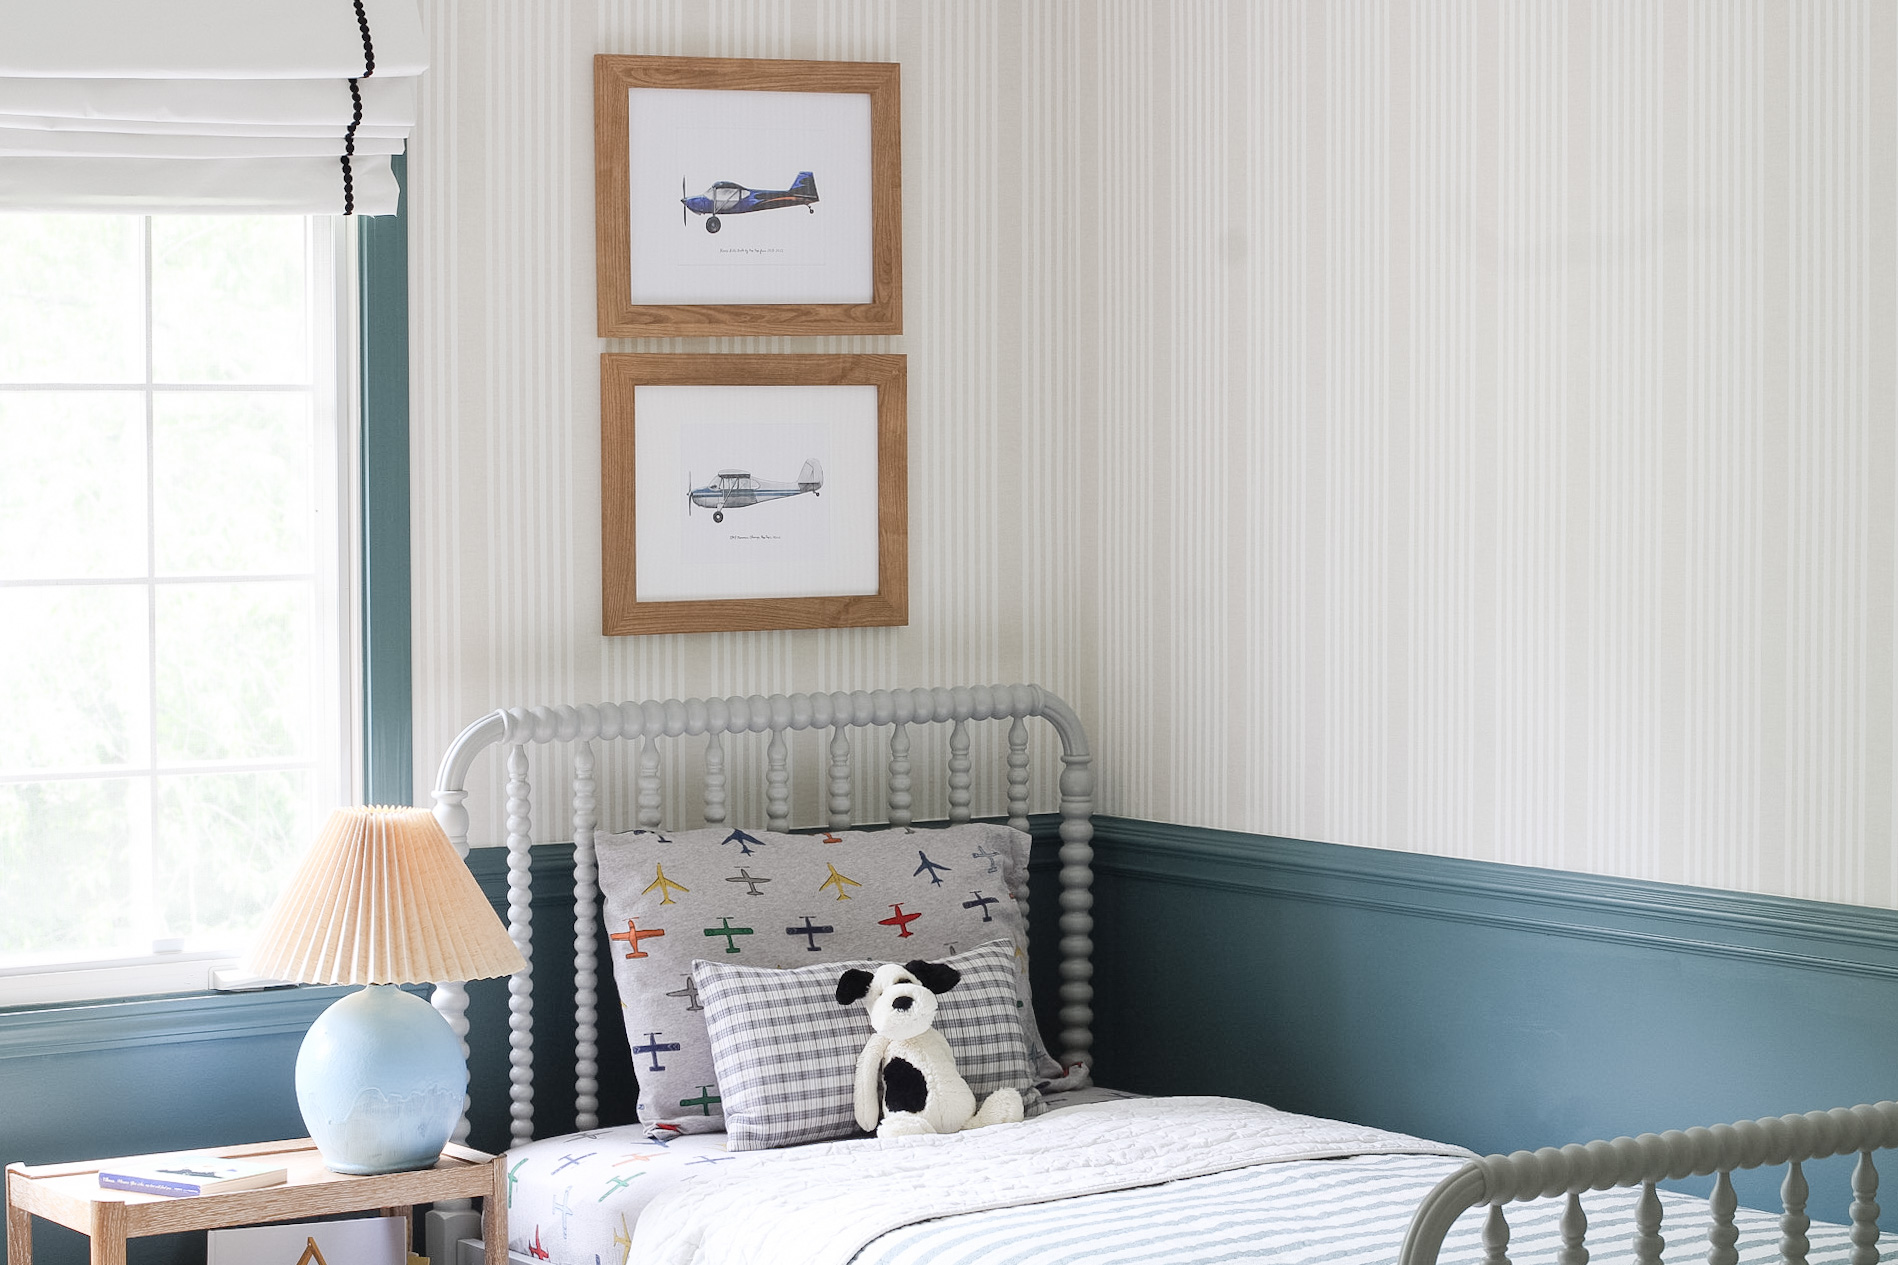 A Classic Airplane Themed Boy’s Bedroom Design